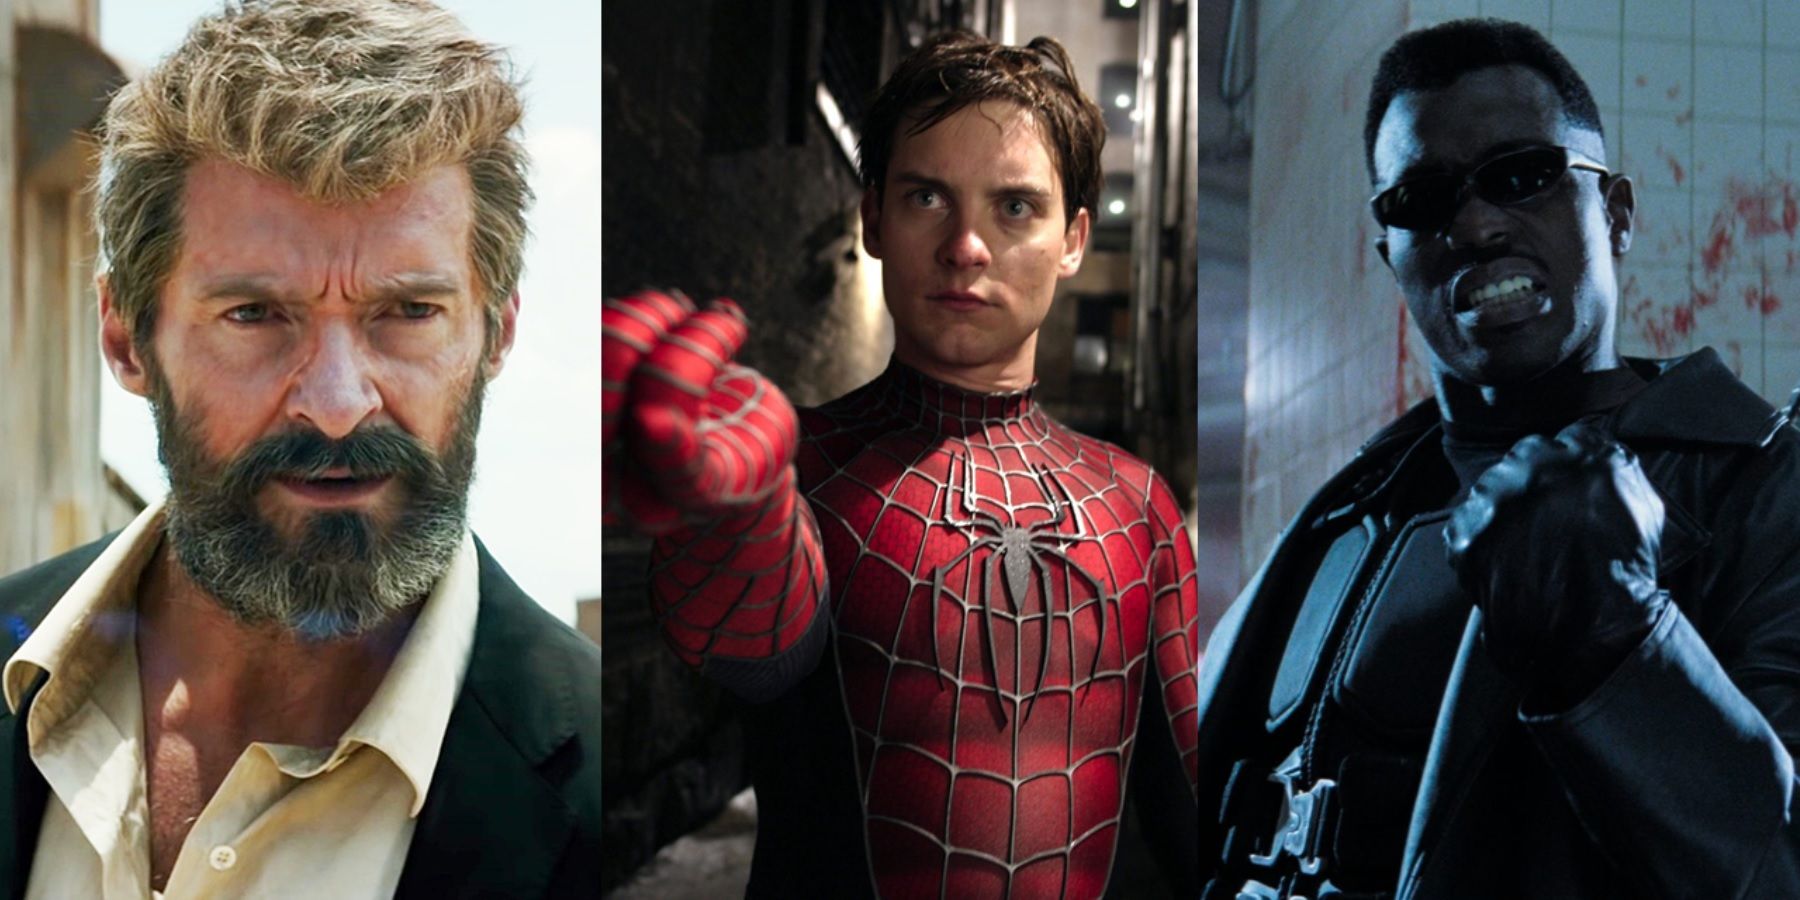 Split image of Hugh Jackman as Wolverine, Tobey Maguire as Spider-Man, and Wesley Snipes as Blade